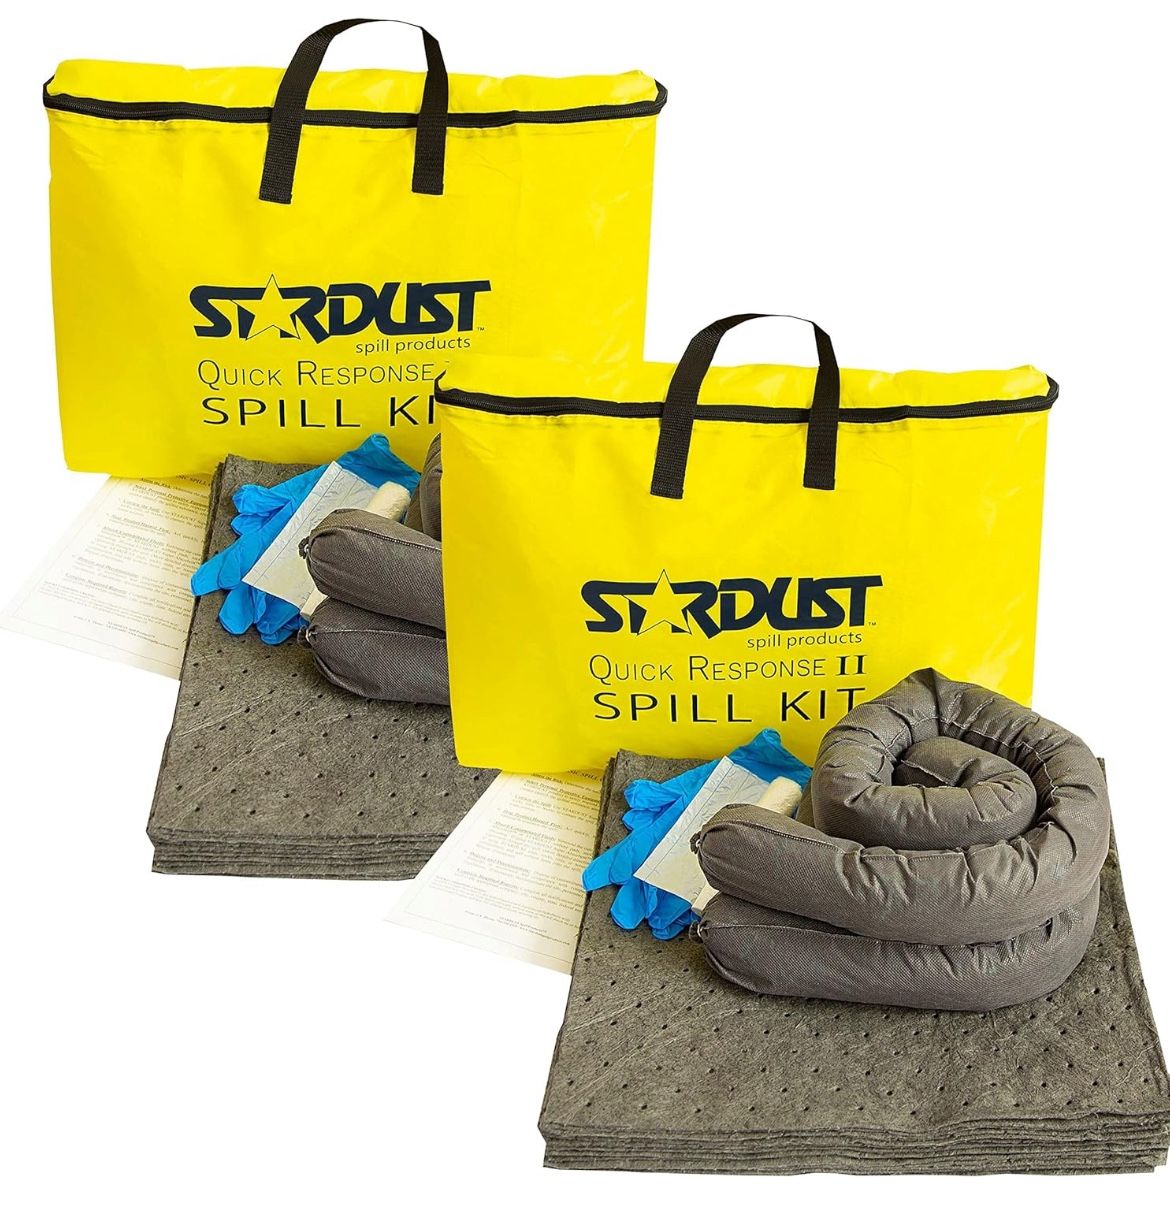 Stardust Quick Response Universal Spill Kit 2-Pack. Each Pack Includes: Yellow Duffle, 15 Universal Sorbent Pads, 2 3"x4' Universal Sorbent Socks, 4 D